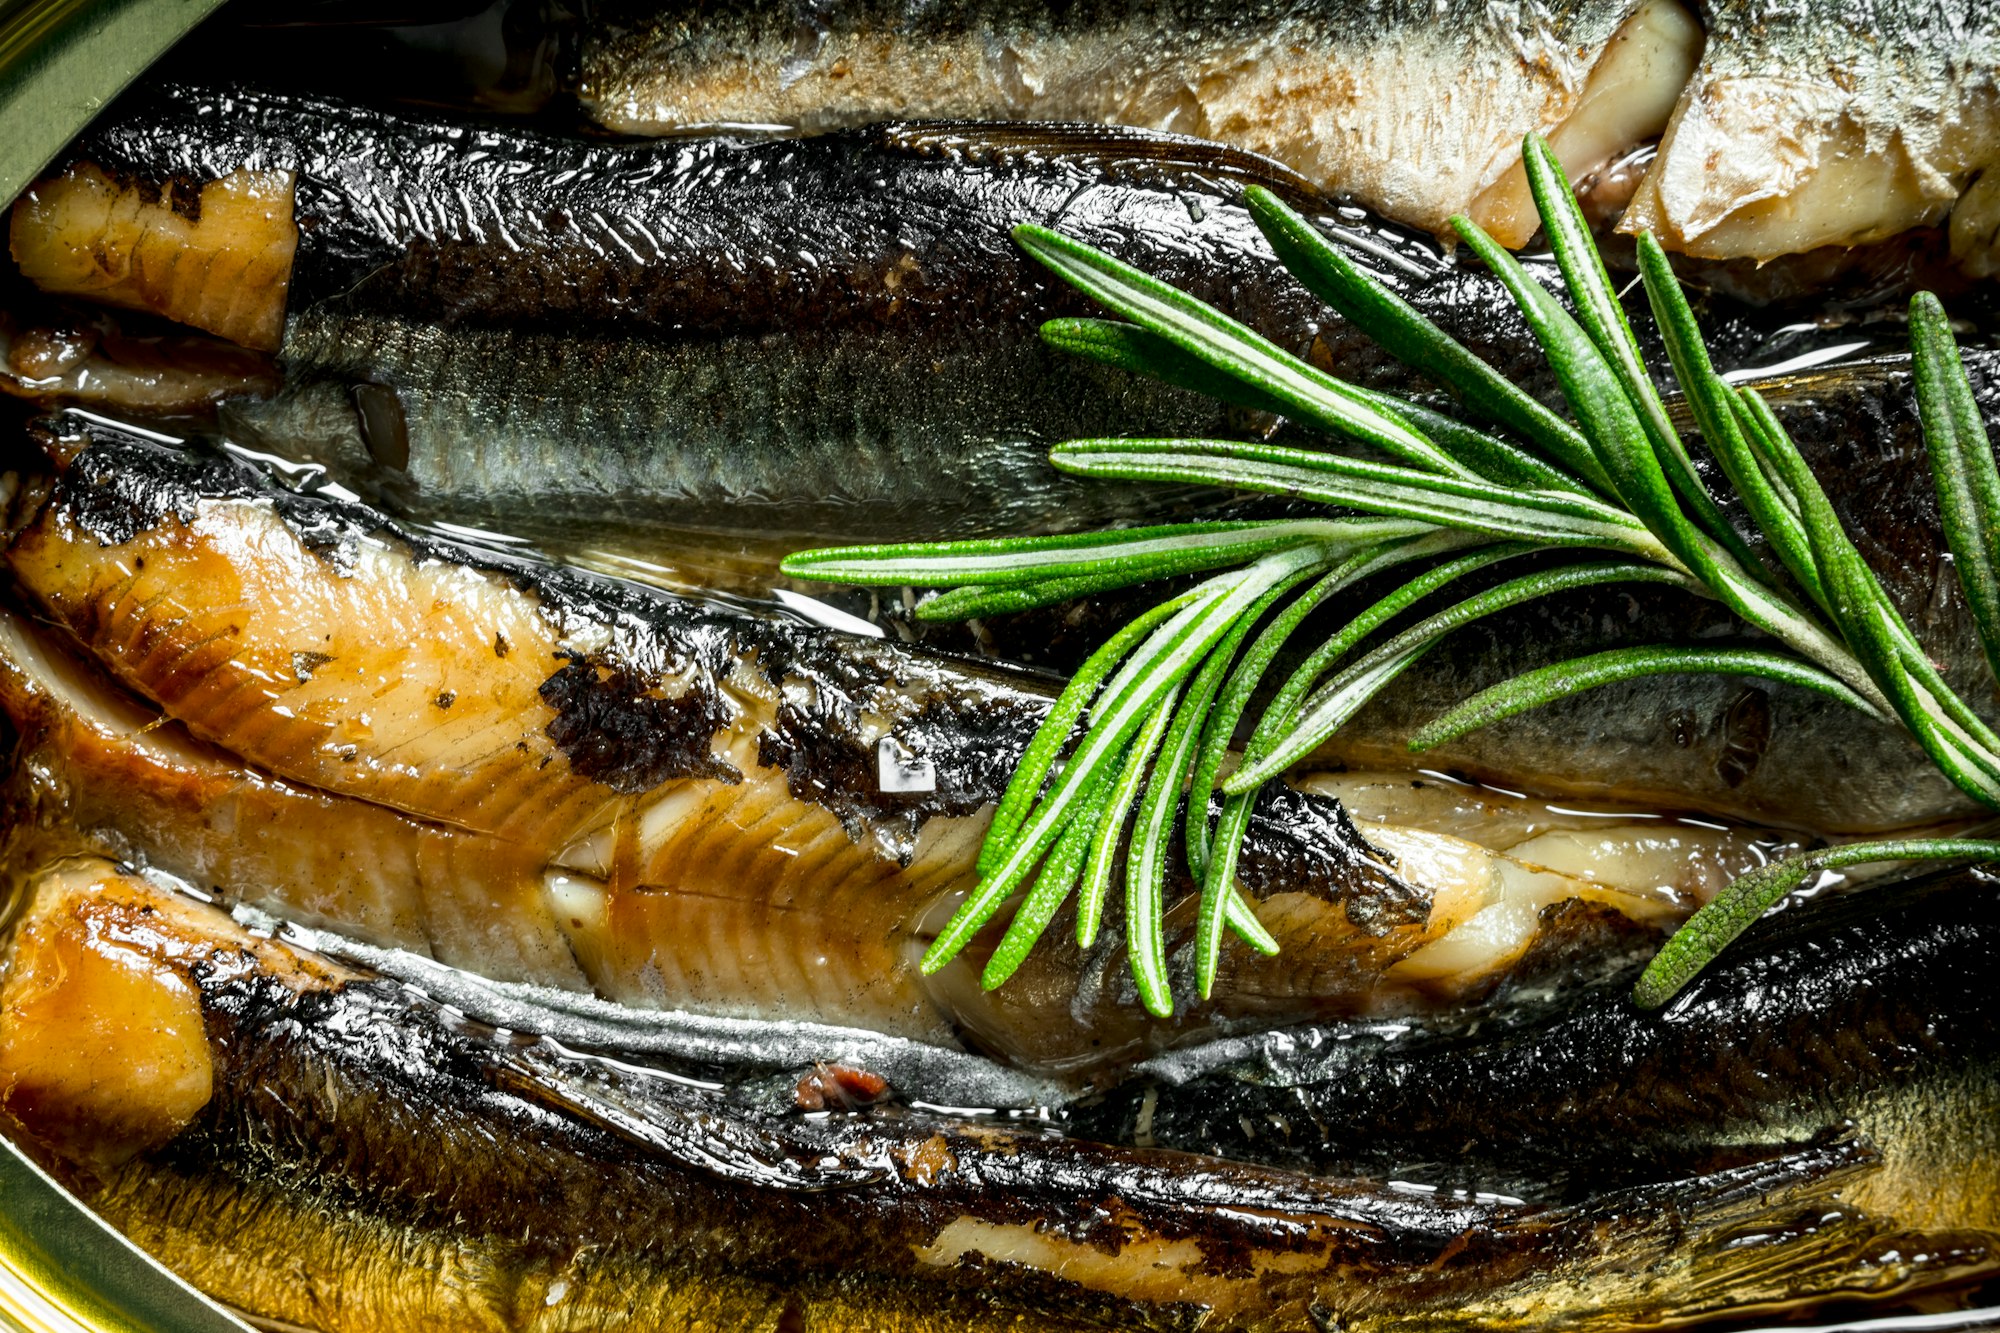 Sprats flavored with rosemary.